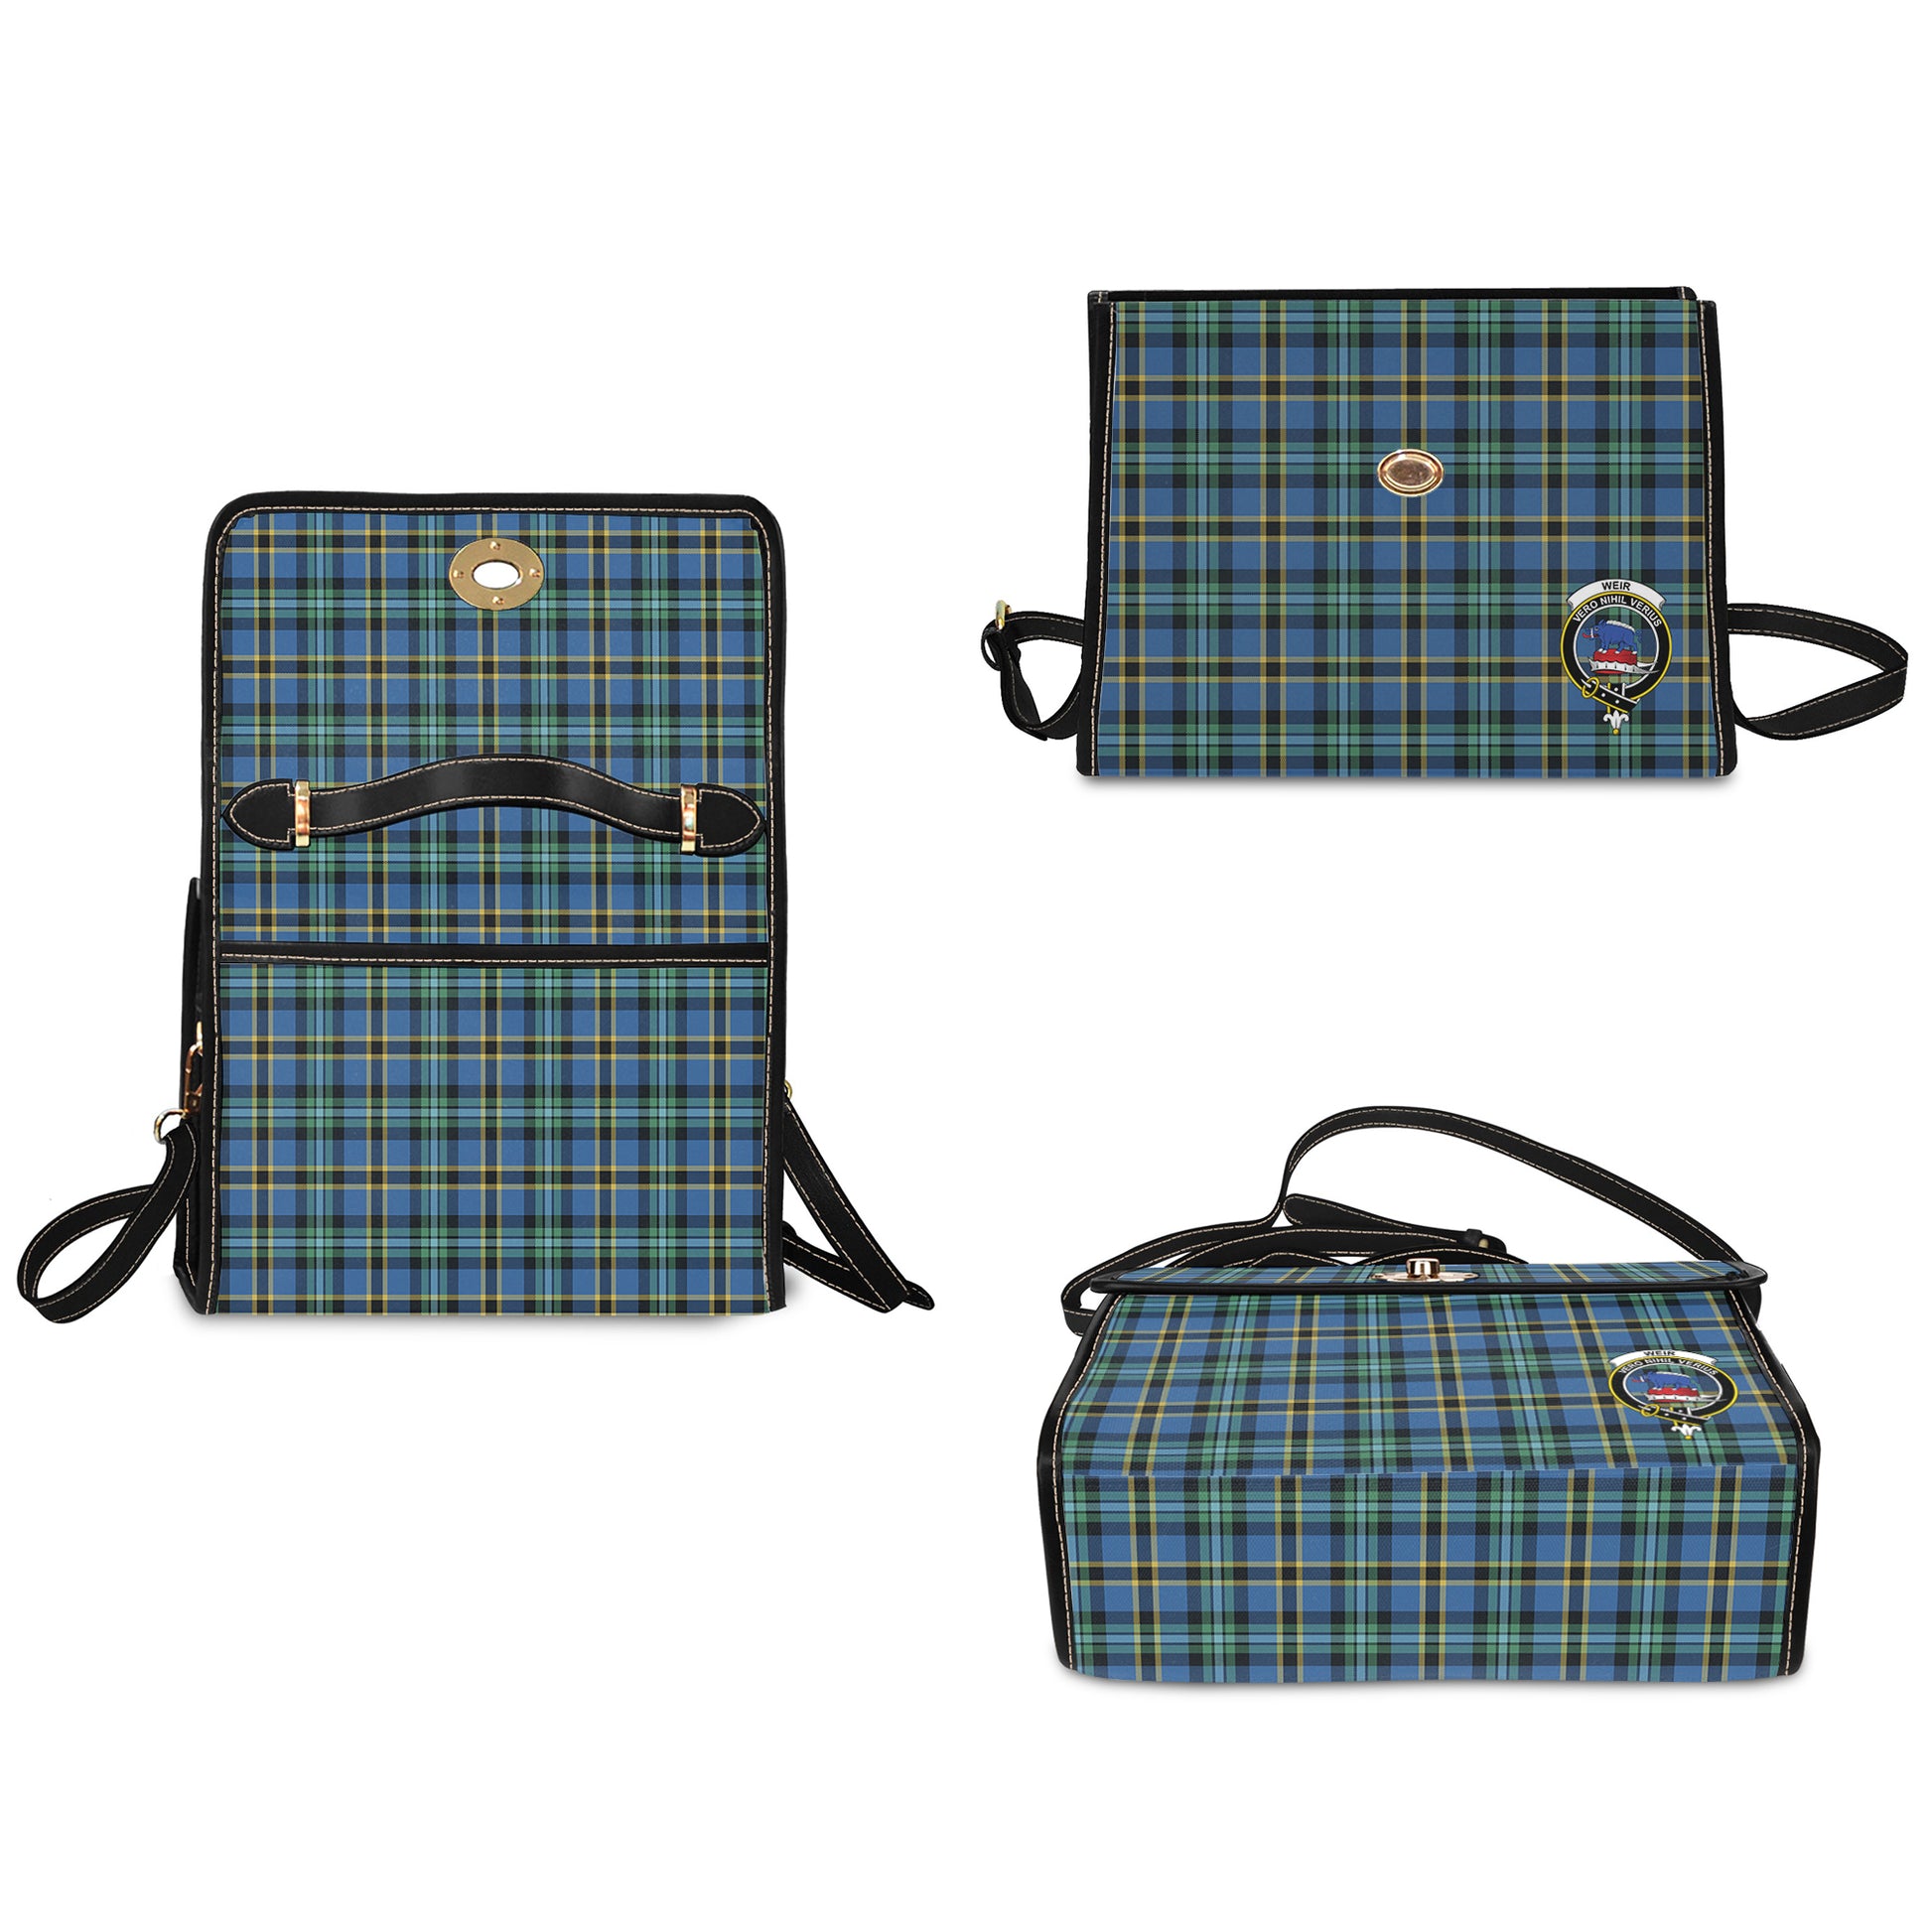 weir-ancient-tartan-leather-strap-waterproof-canvas-bag-with-family-crest